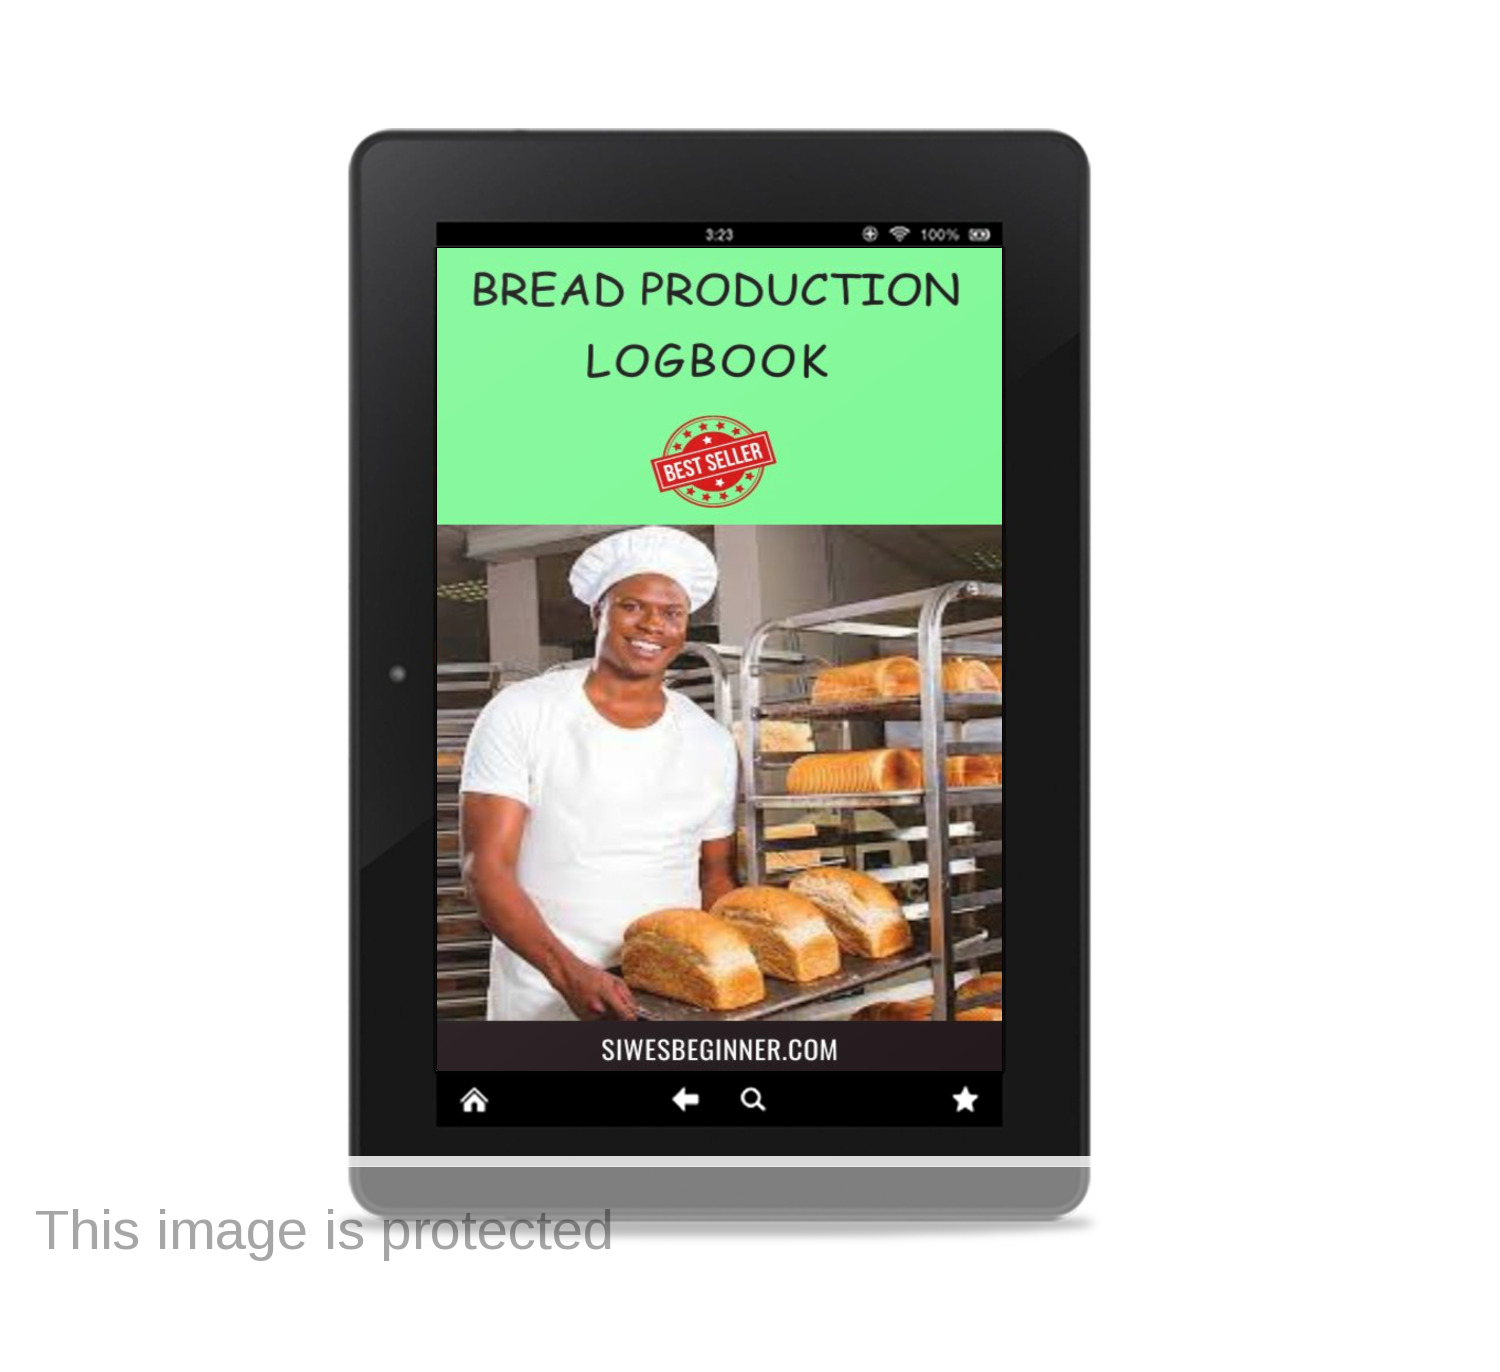 Bakery (Bread Production) Logbook